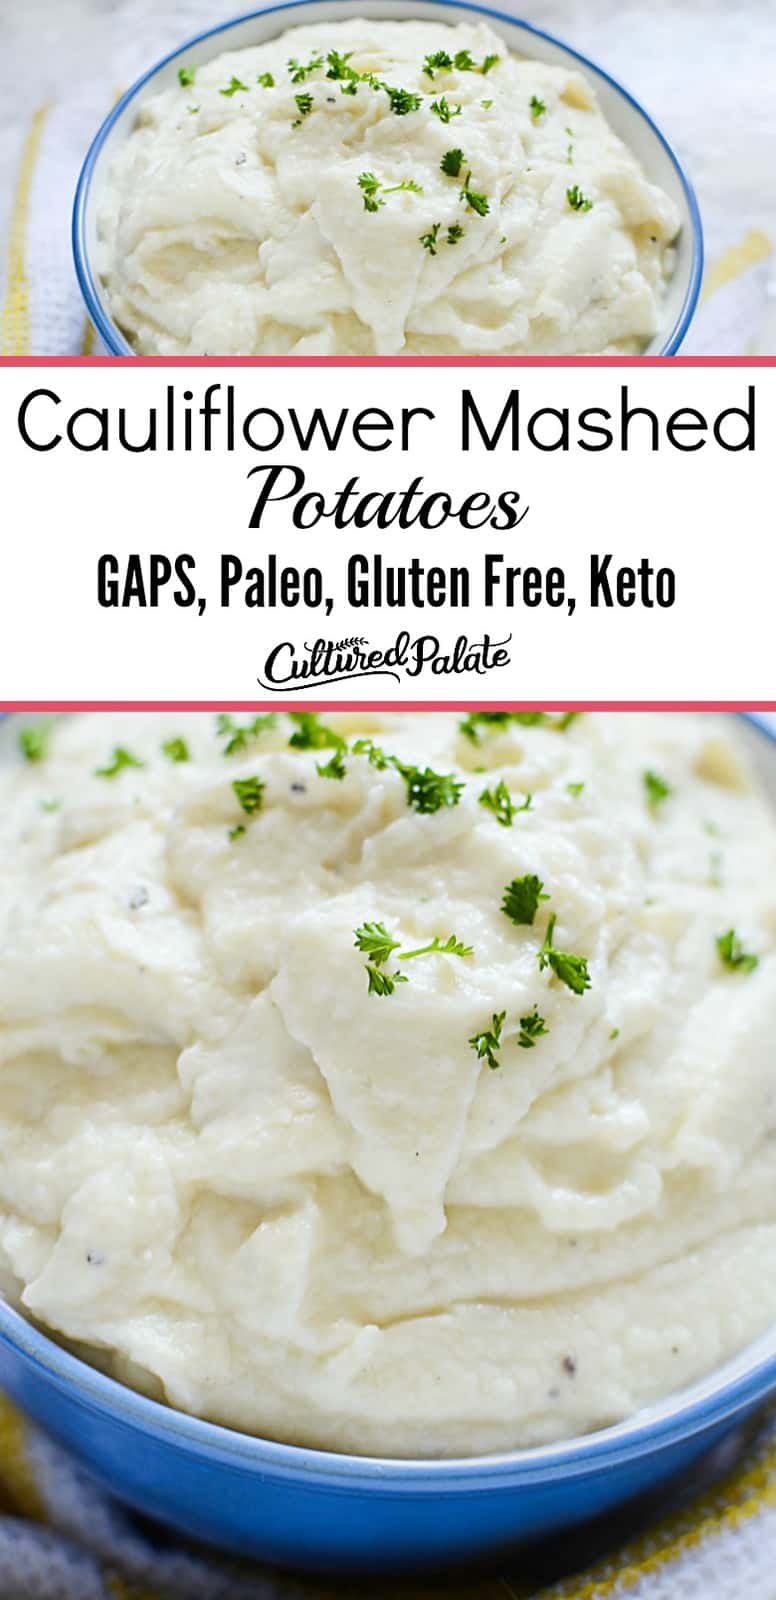 Cauliflower Mashed Potatoes recipe shown in blue rimmed bowl with two images and text overlay